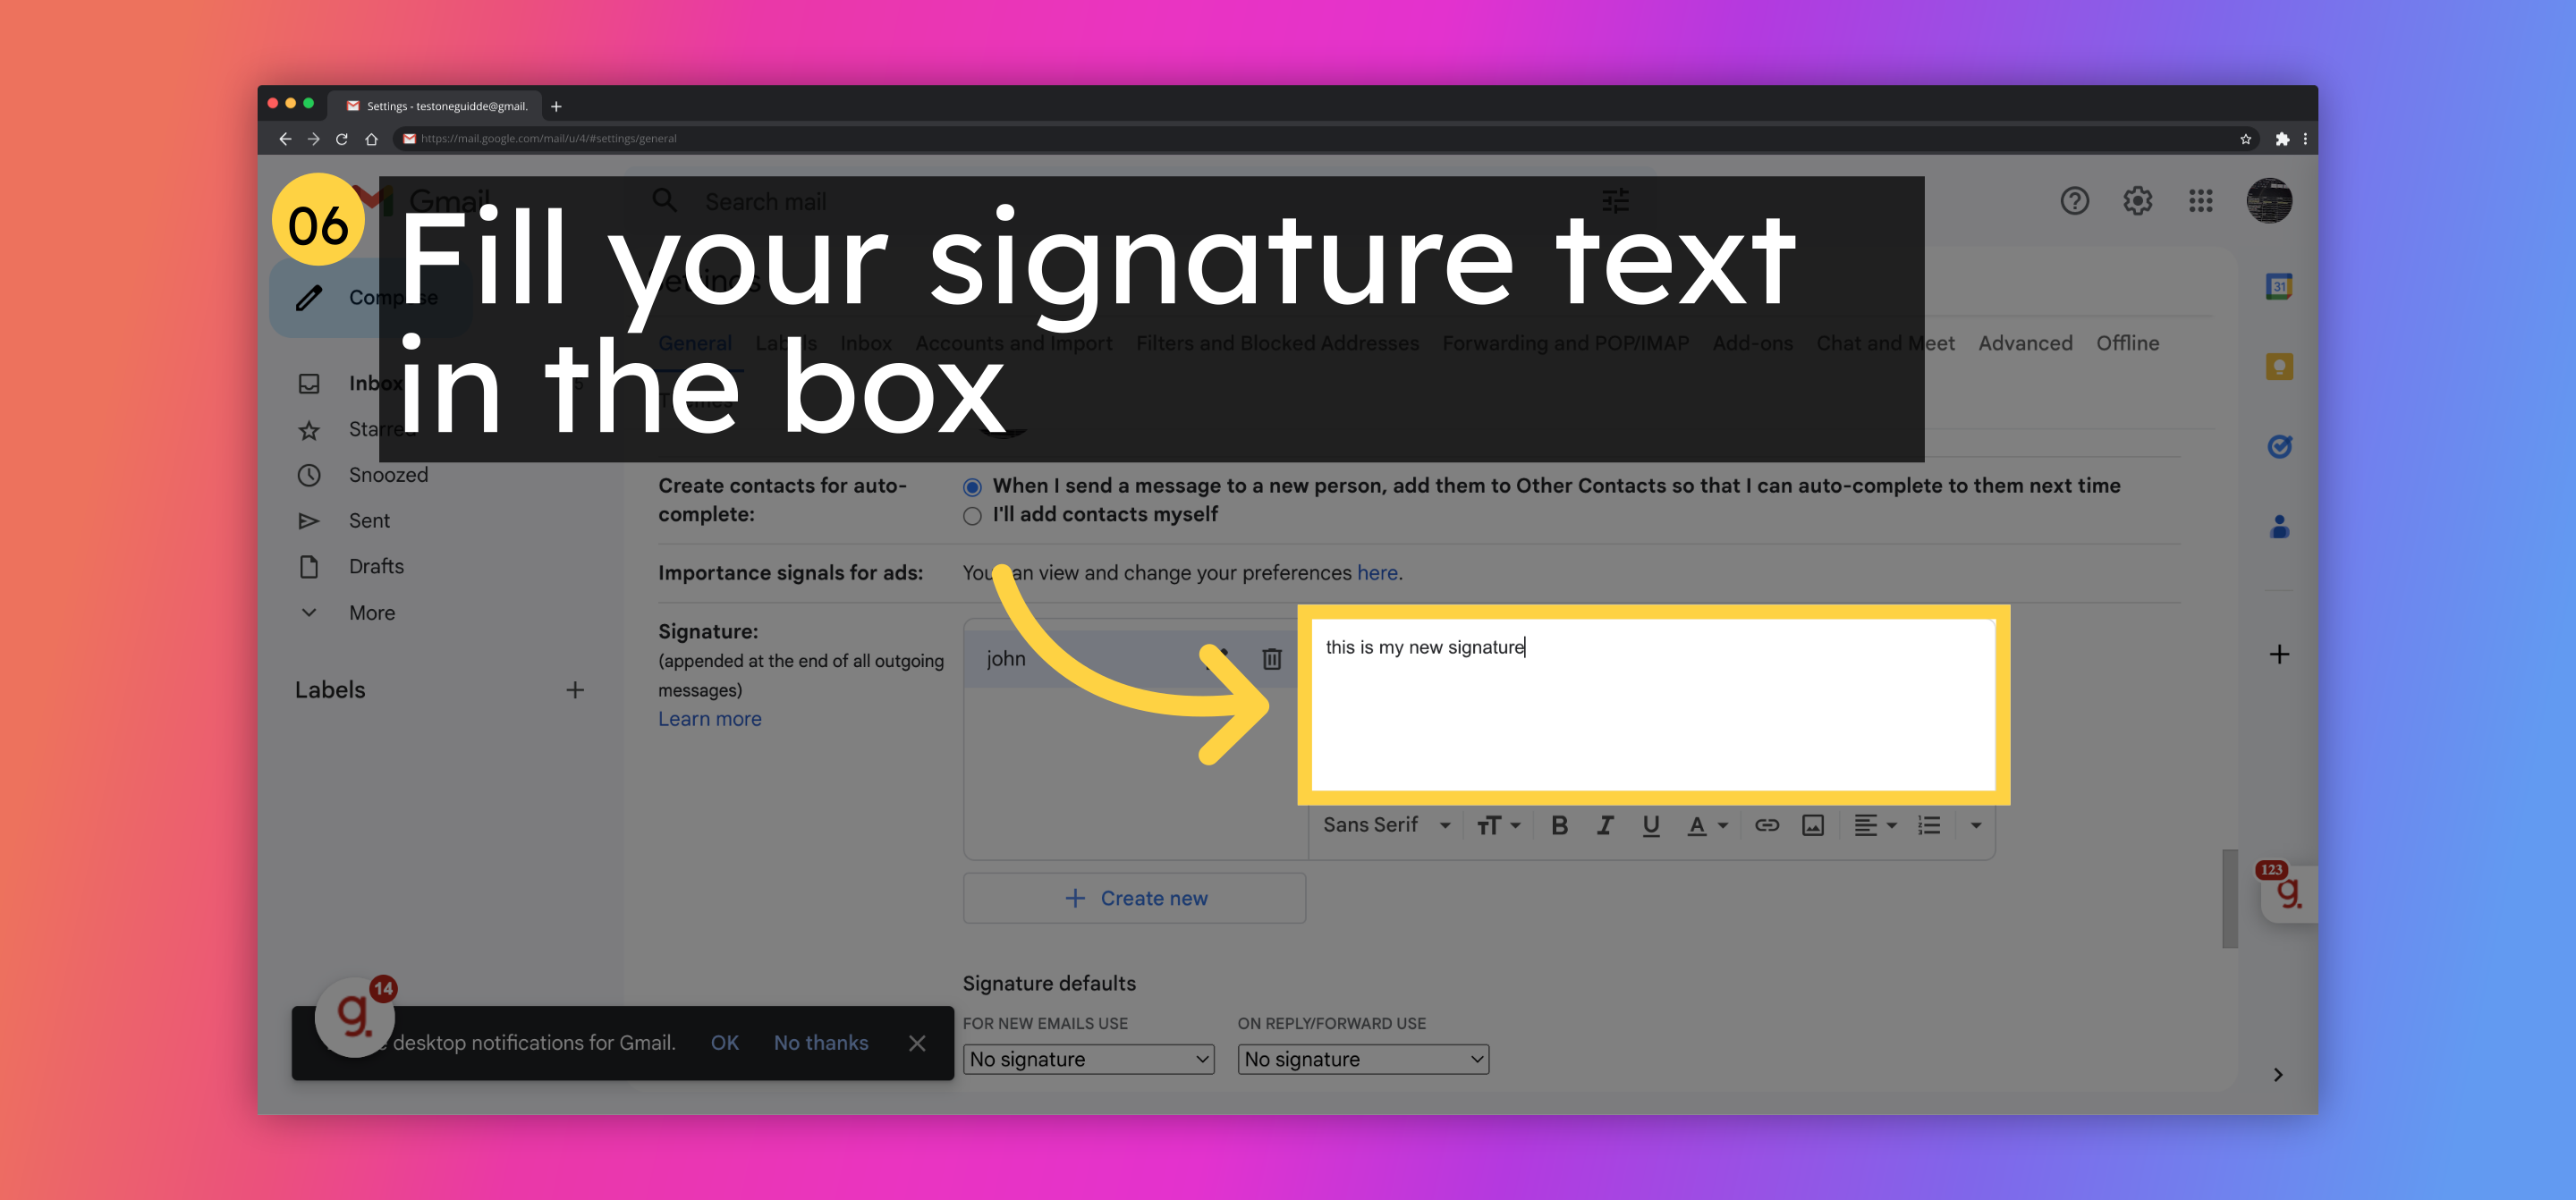 Fill your signature text in the box